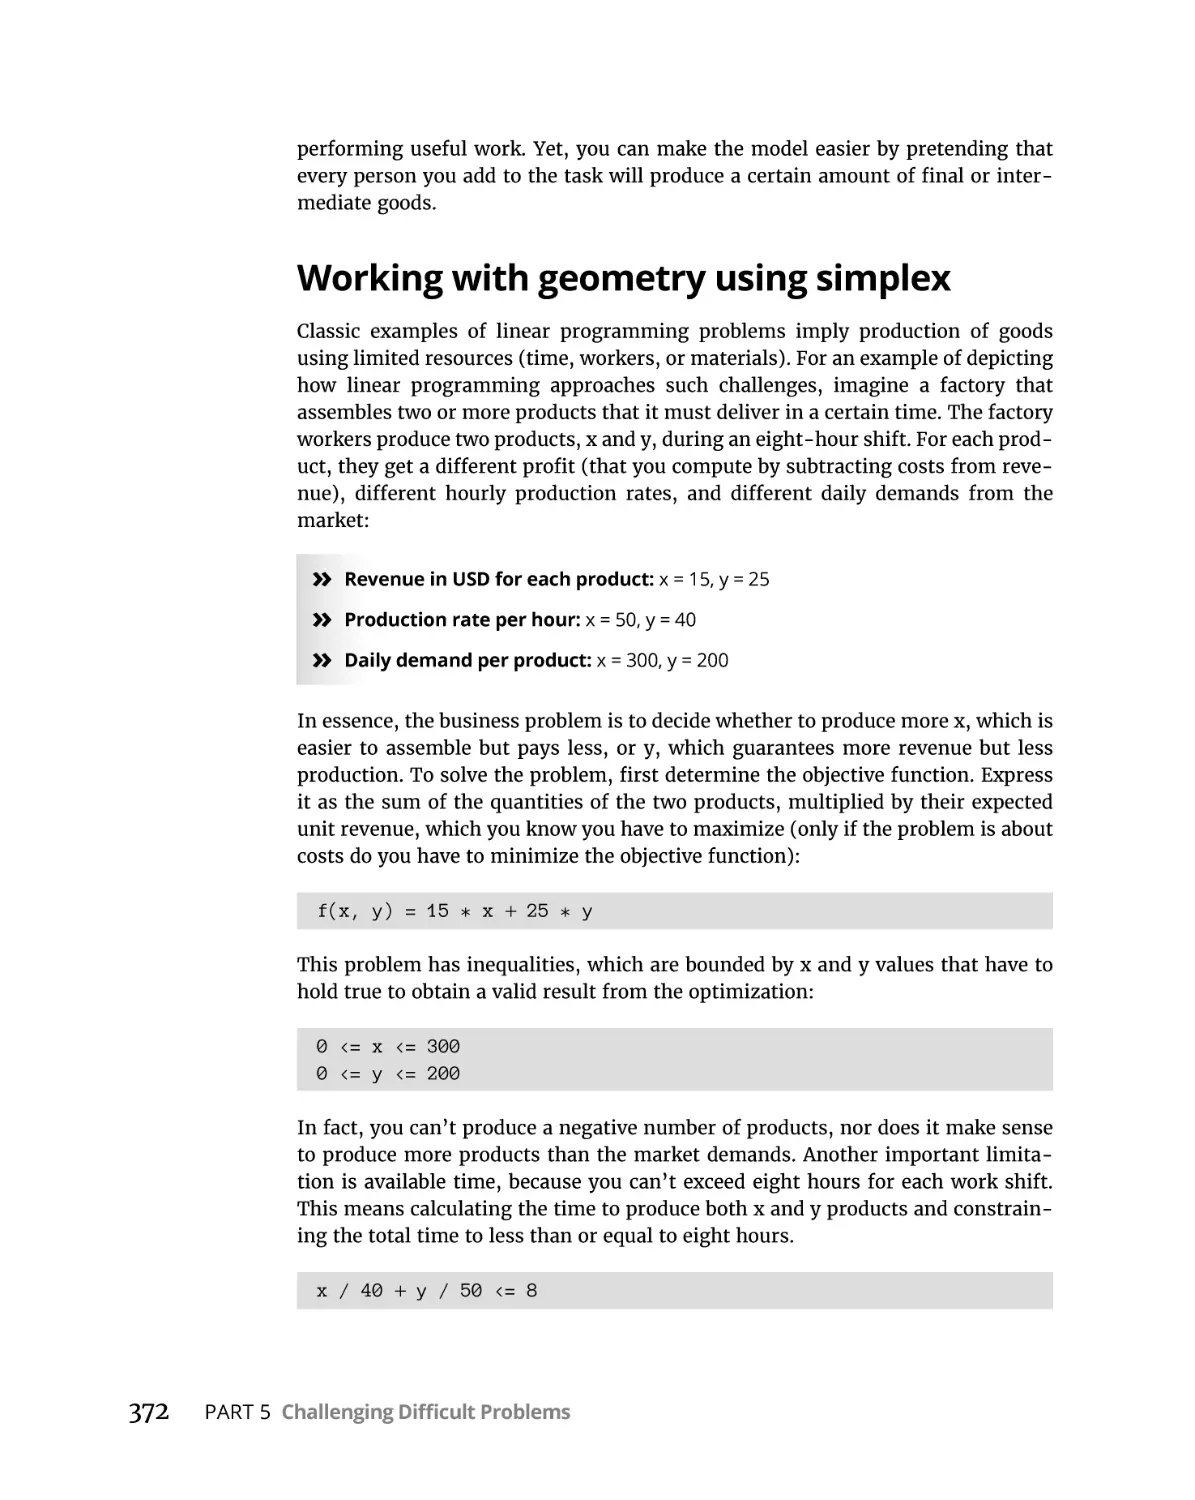 Working with geometry using simplex